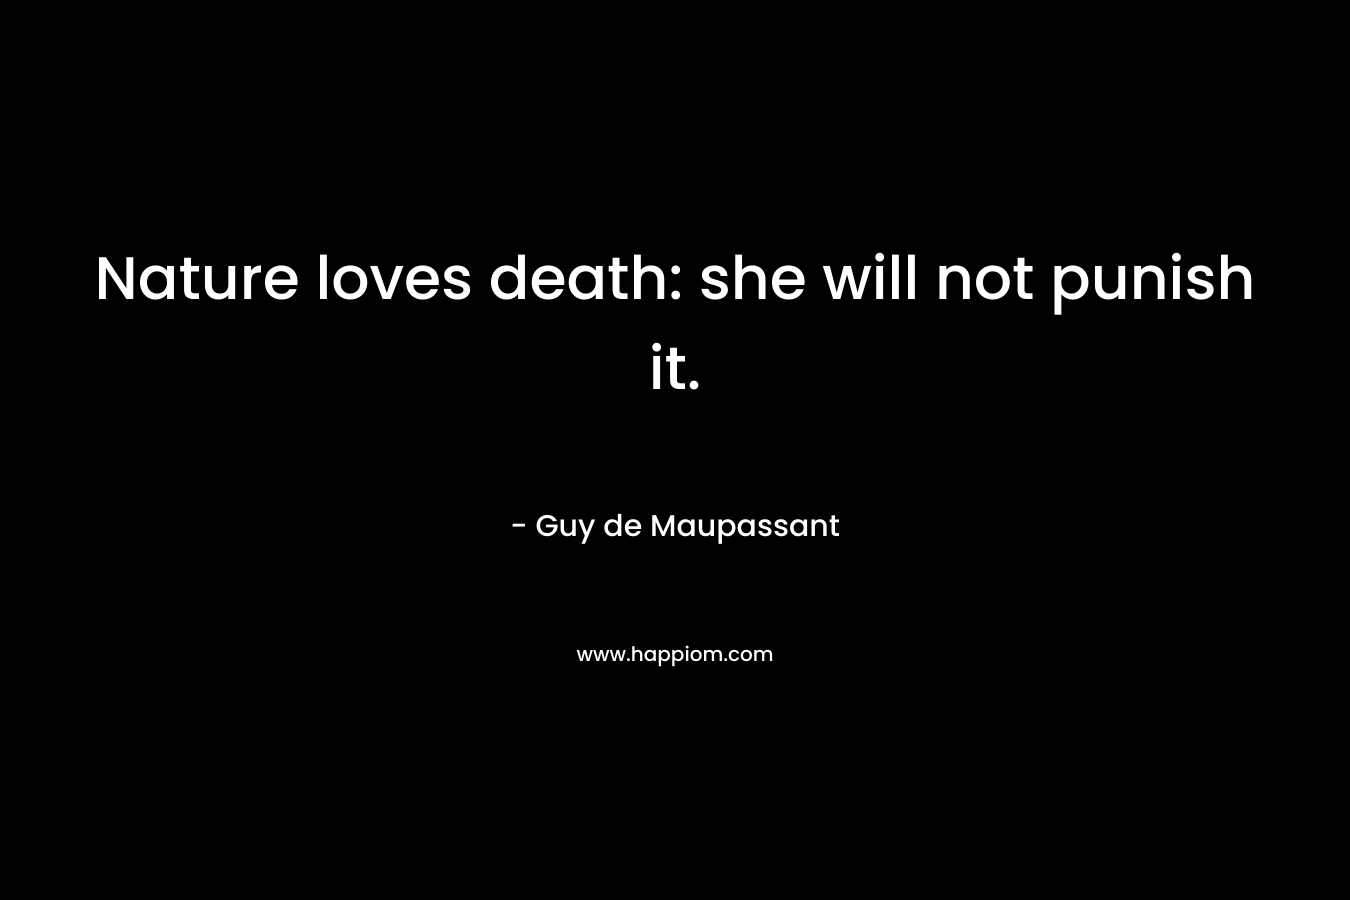 Nature loves death: she will not punish it. – Guy de Maupassant